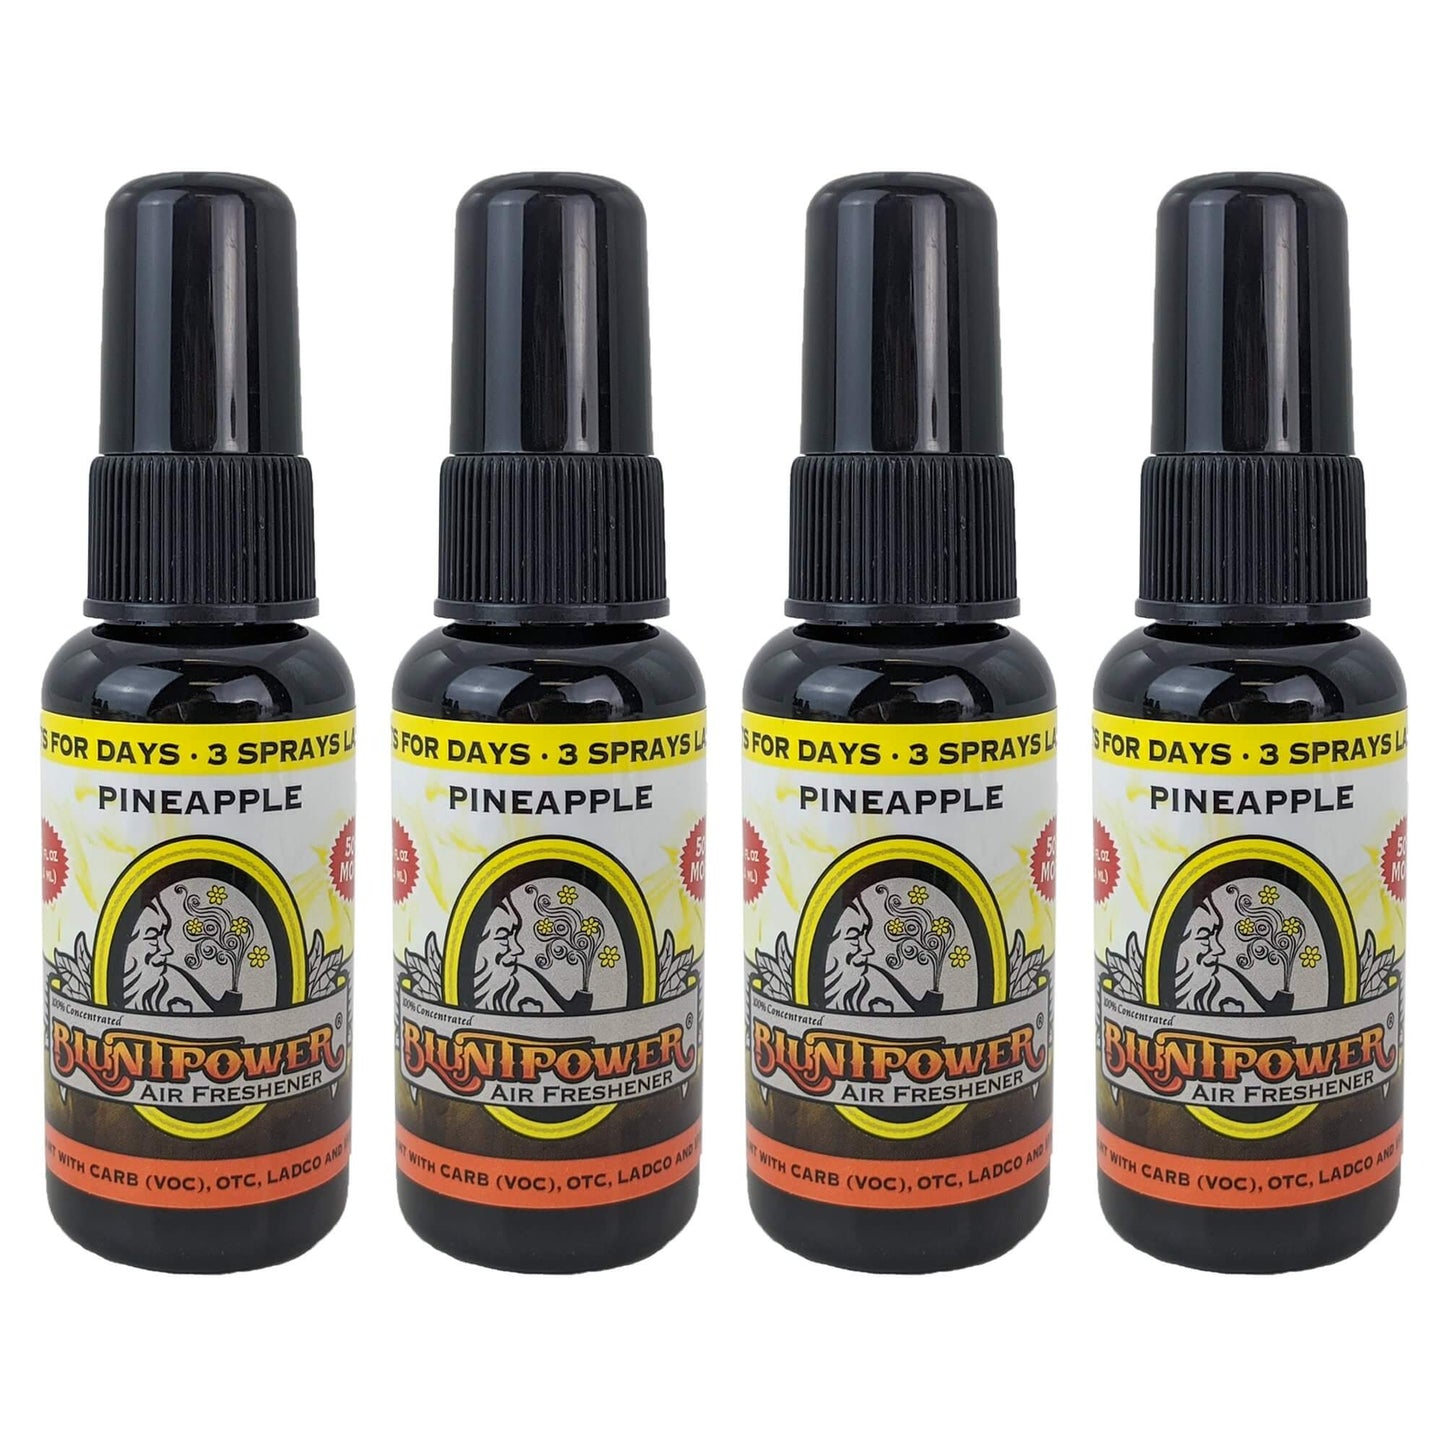 4-Pack: Blunt Power Spray 1.5 OZ Pineapple Scent